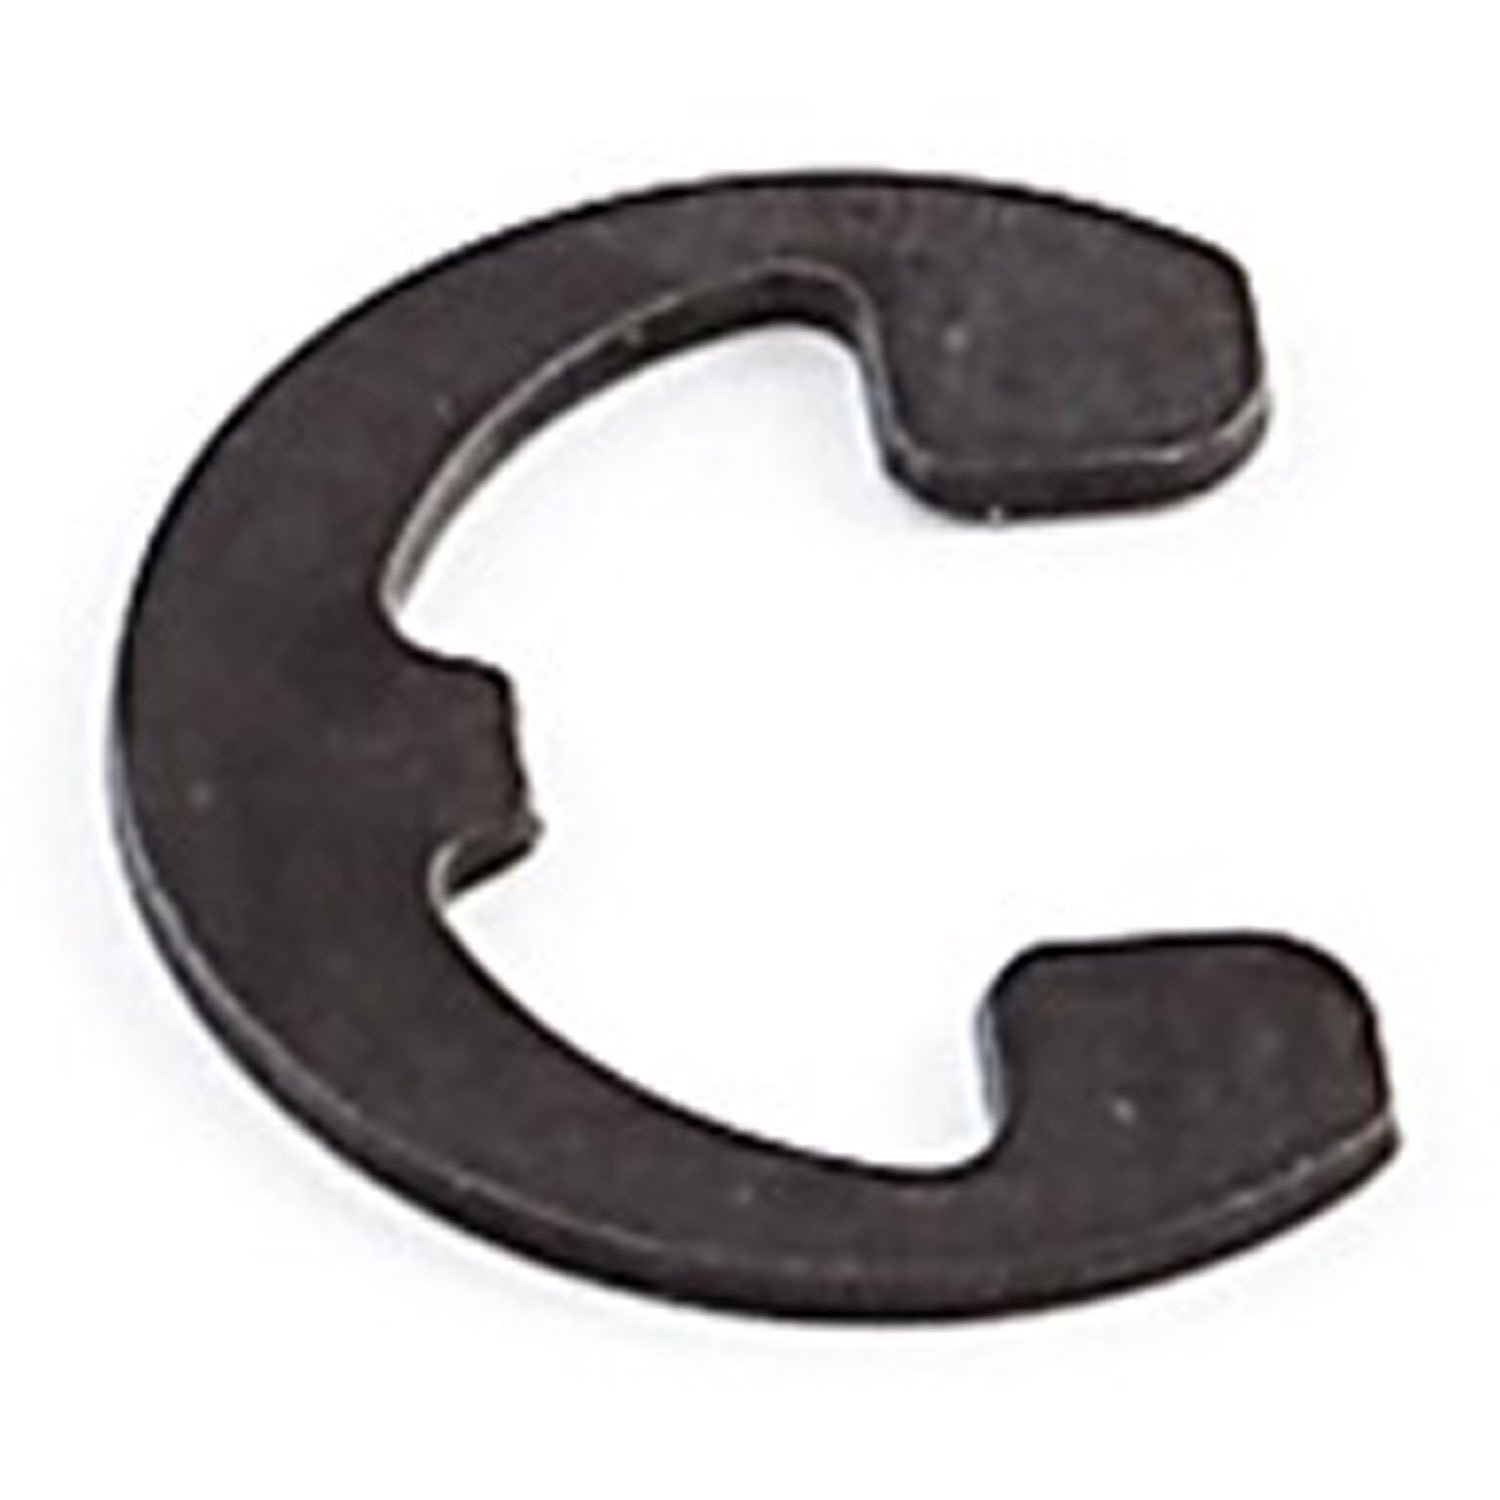 This axle disconnect shift fork snap ring for Dana 30 from Omix-ADA fits 87-95 Jeep Wranglers.